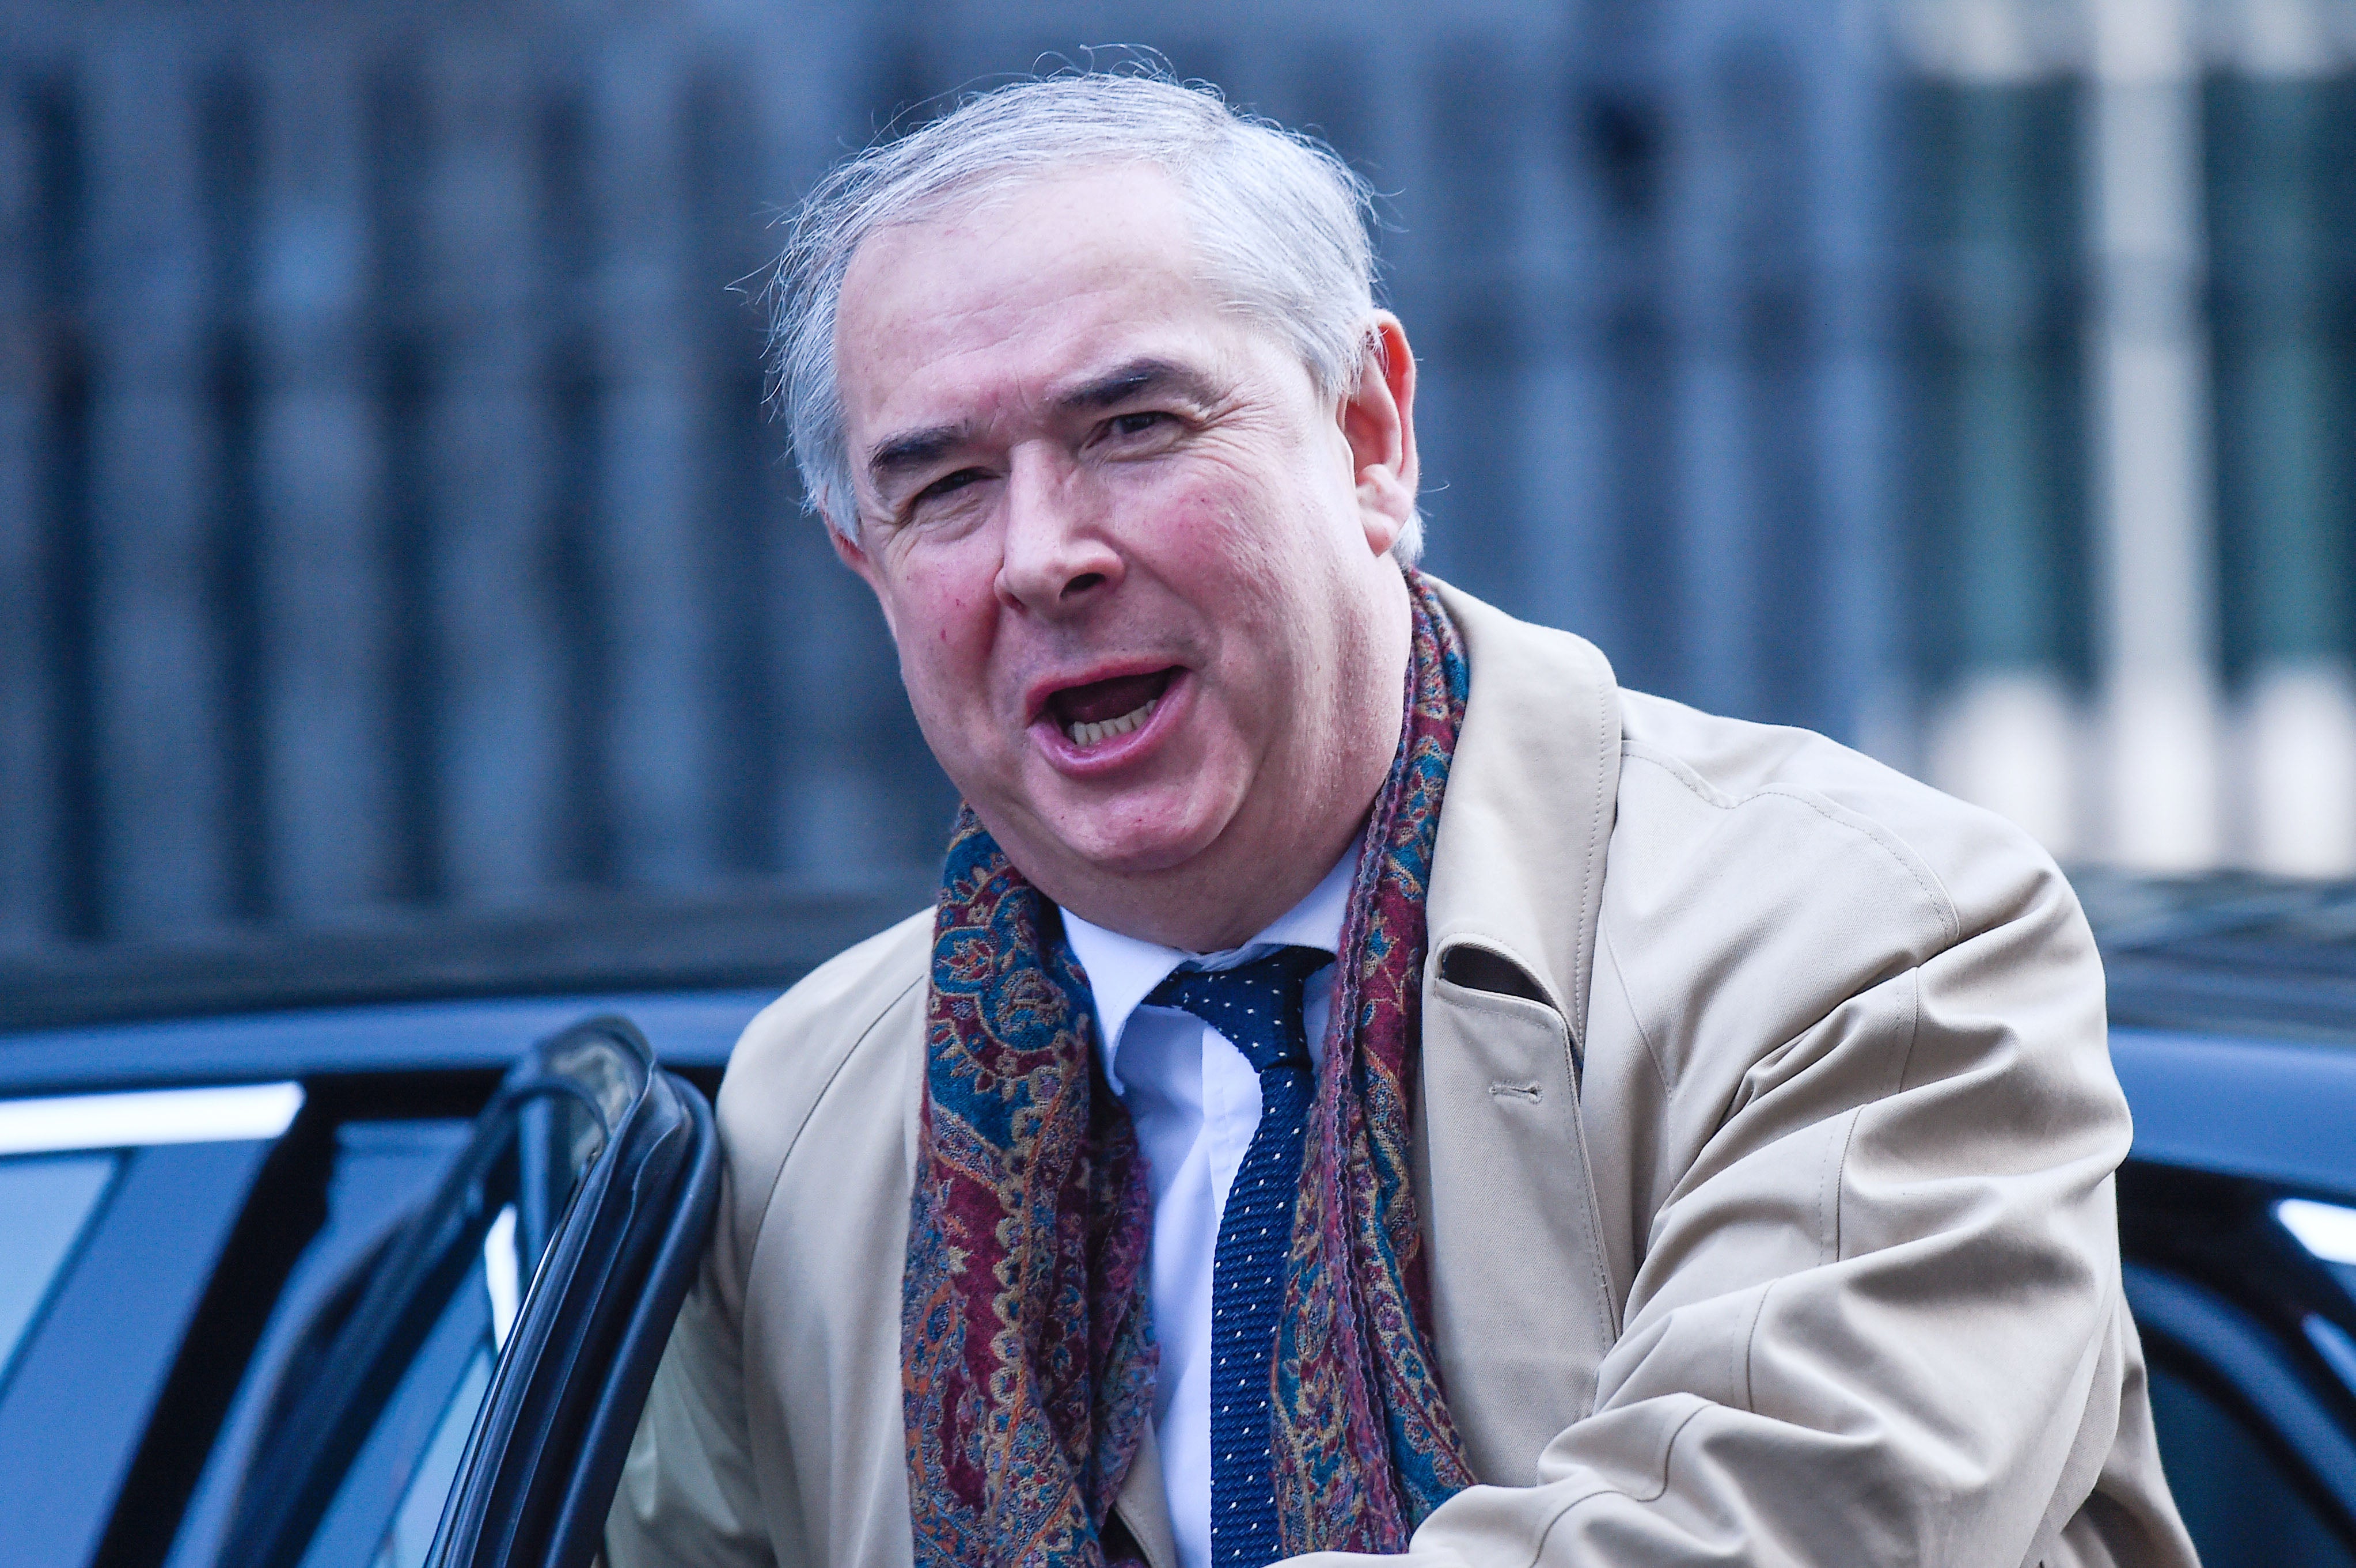 Geoffrey Cox the former Attorney General, arrives at Downing Street